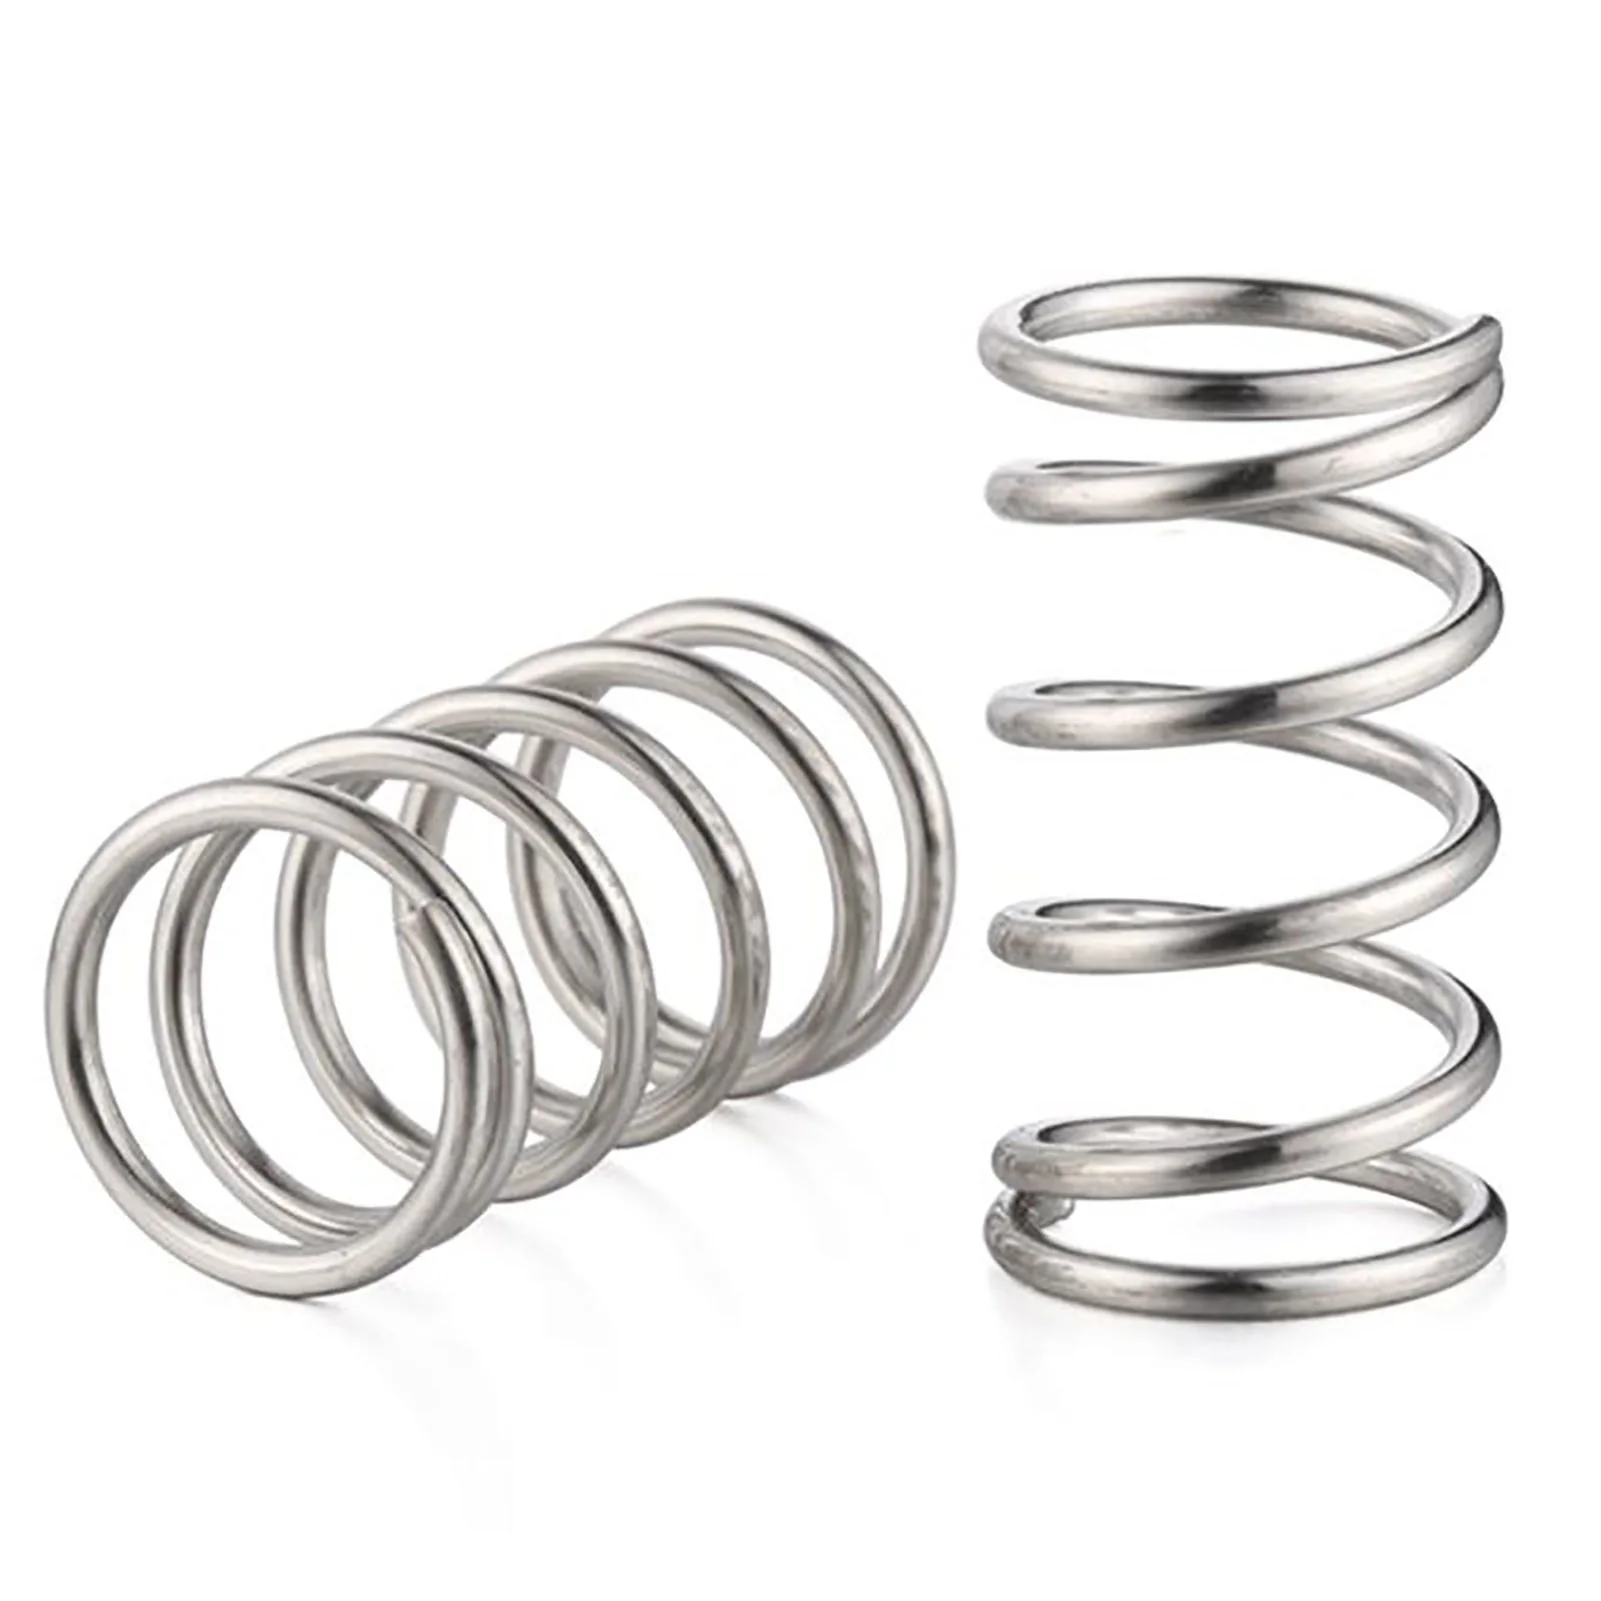 

4PCS 2x20mm Compression Spring, Wire Diameter 0.08'', Outer Diameter 0.78'', Free Length 0.39''-2'', Stainless Steel